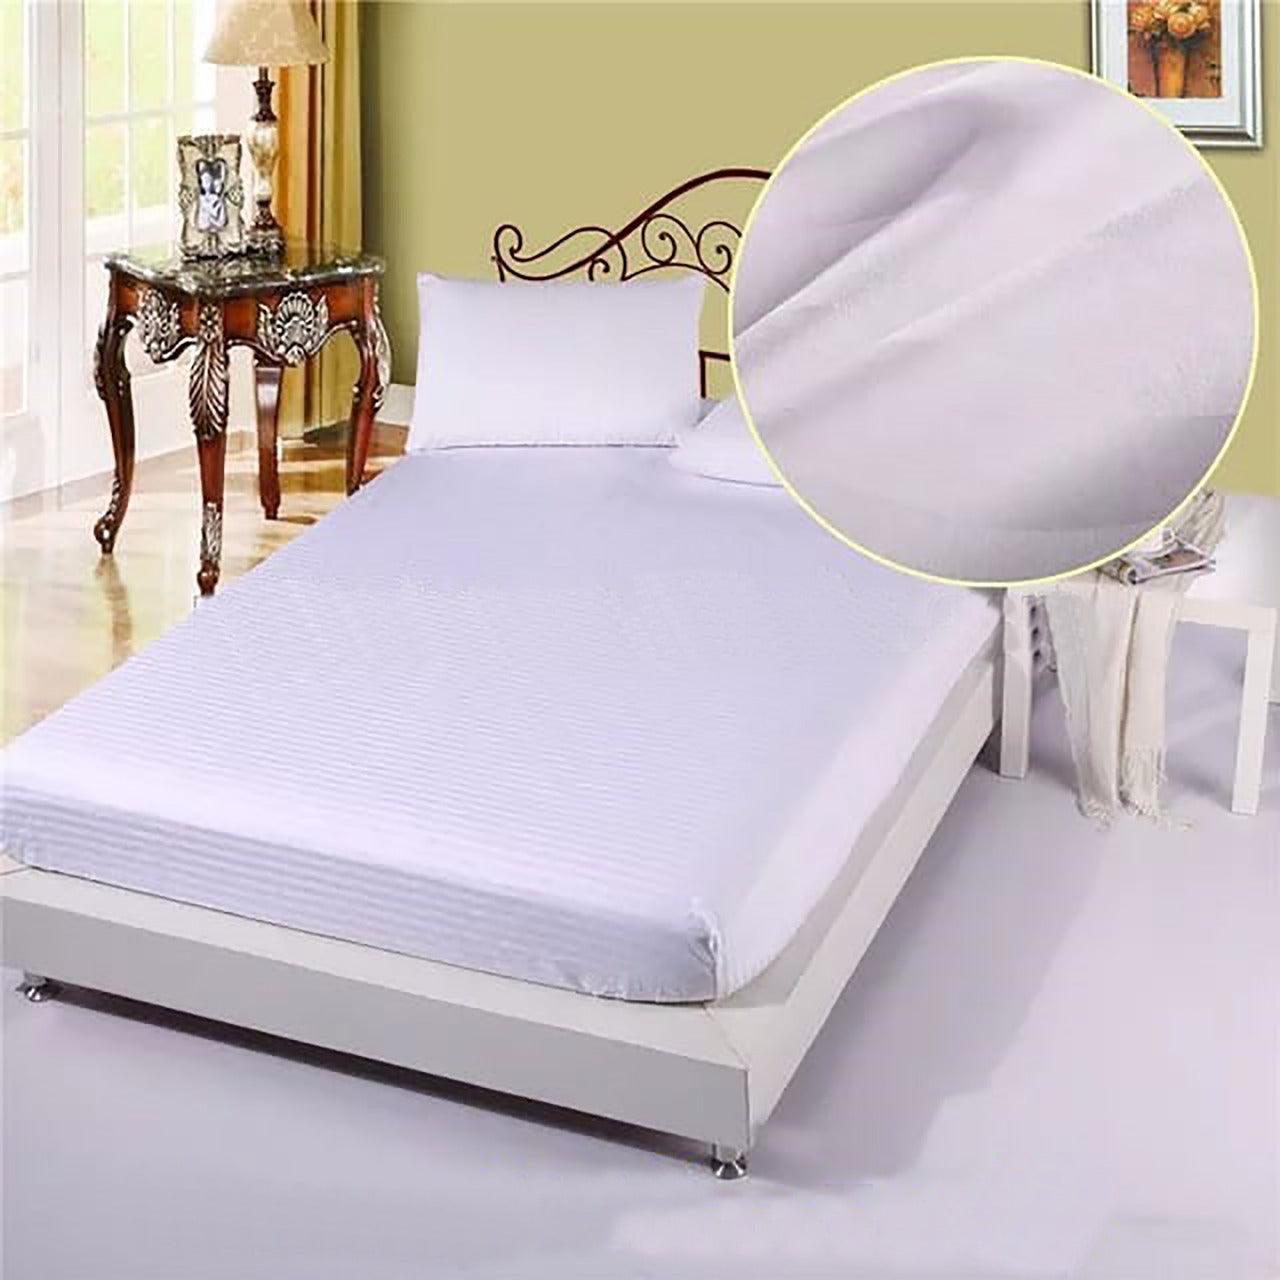 3 PCs Satin Strips Fitted Sheet with Pillow cover - 92Bedding